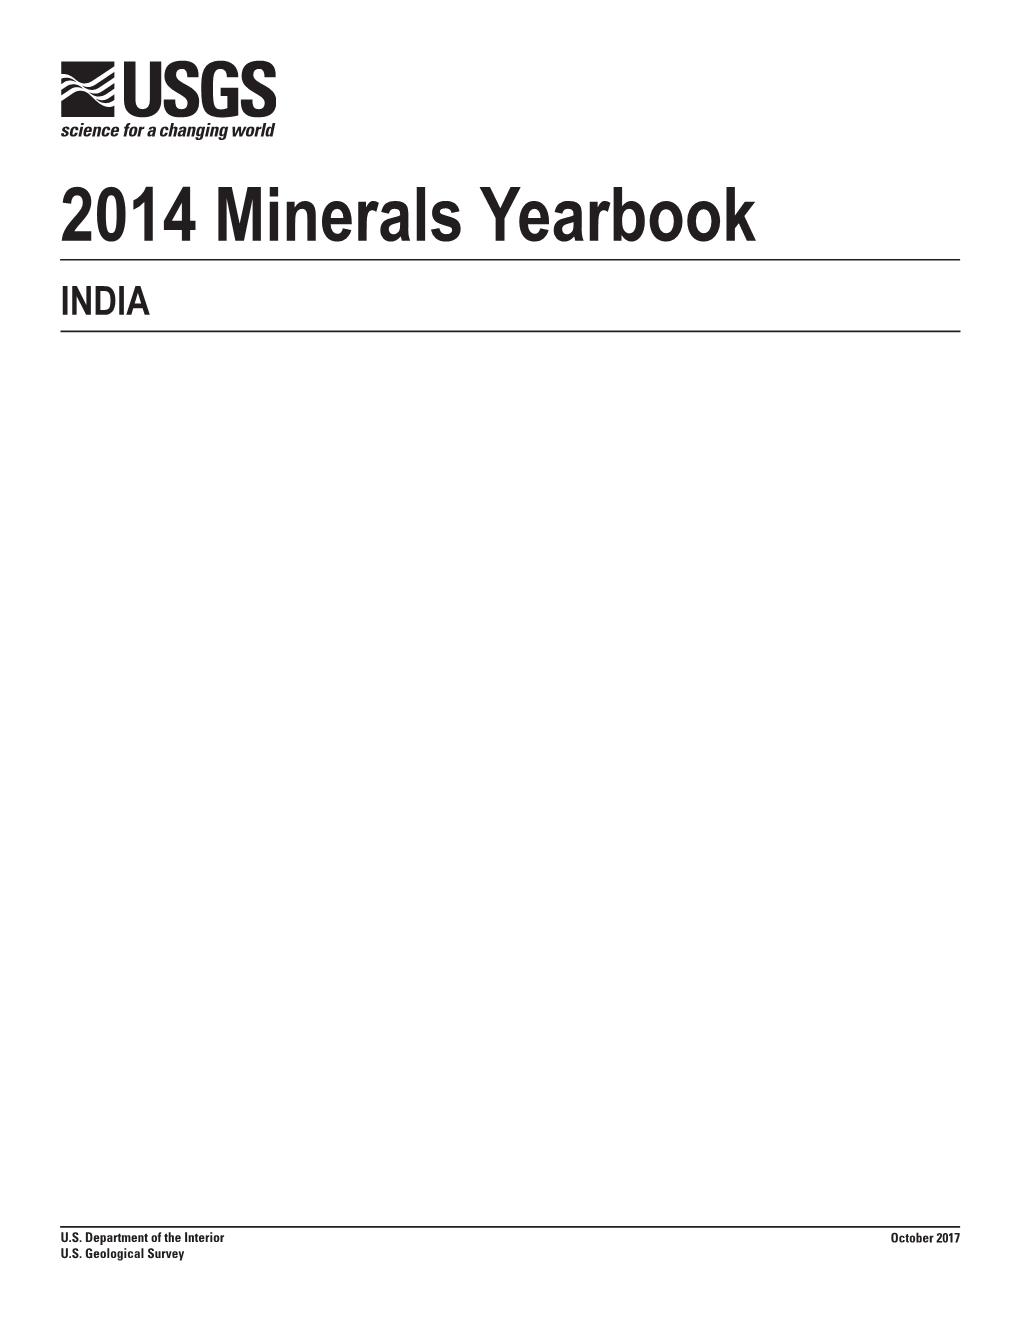 The Mineral Industry of India in 2014